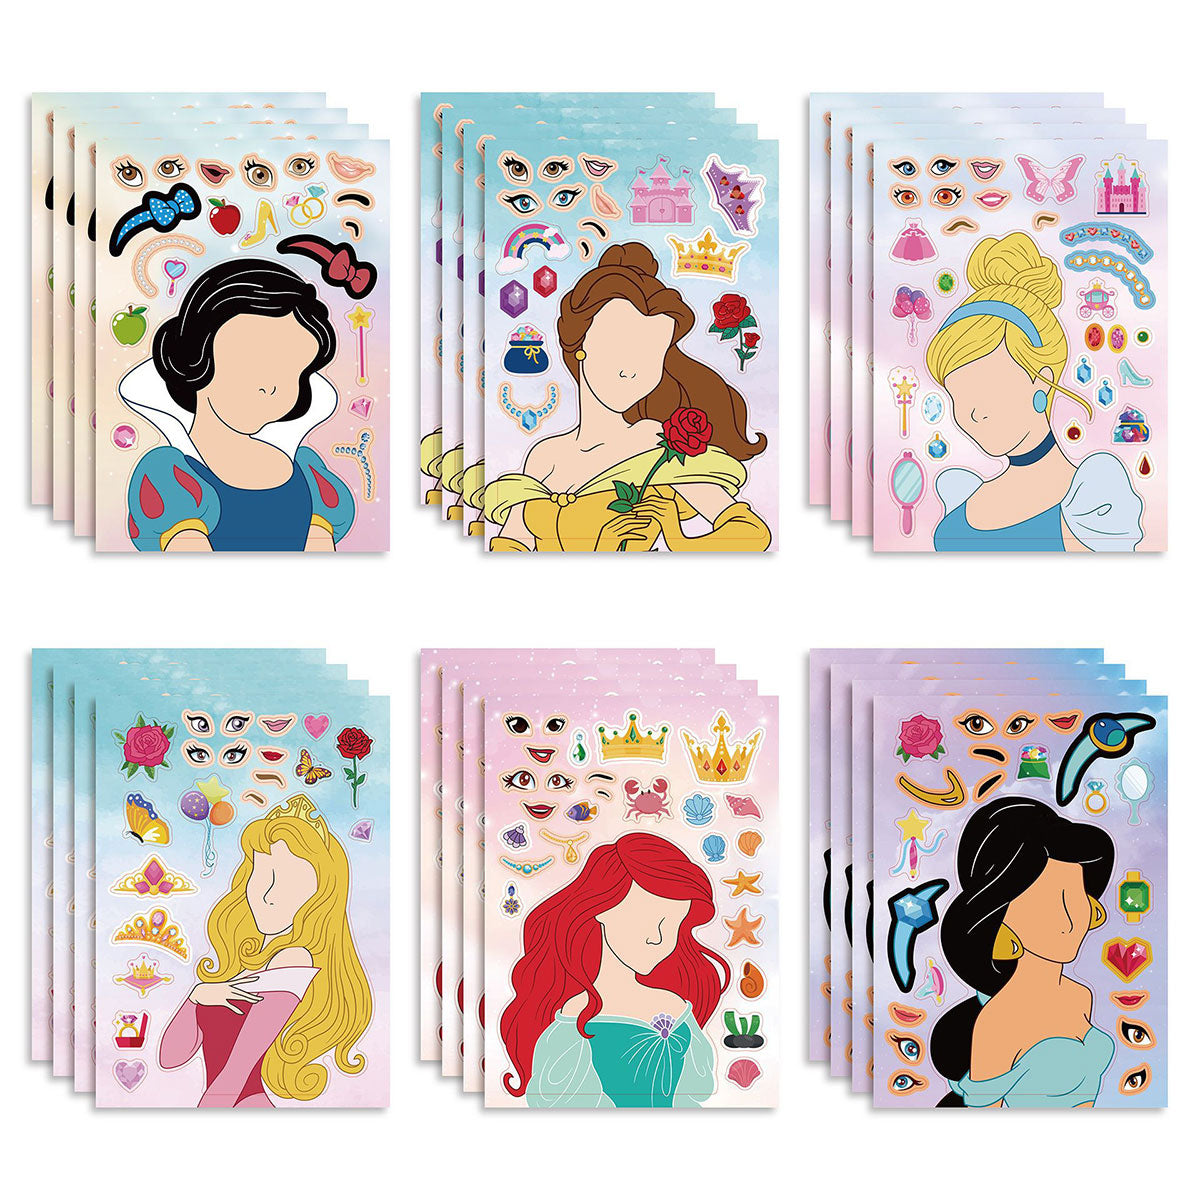 Give Snow White, Belle, Cinderella and Ariel the expression you always want theme to have!